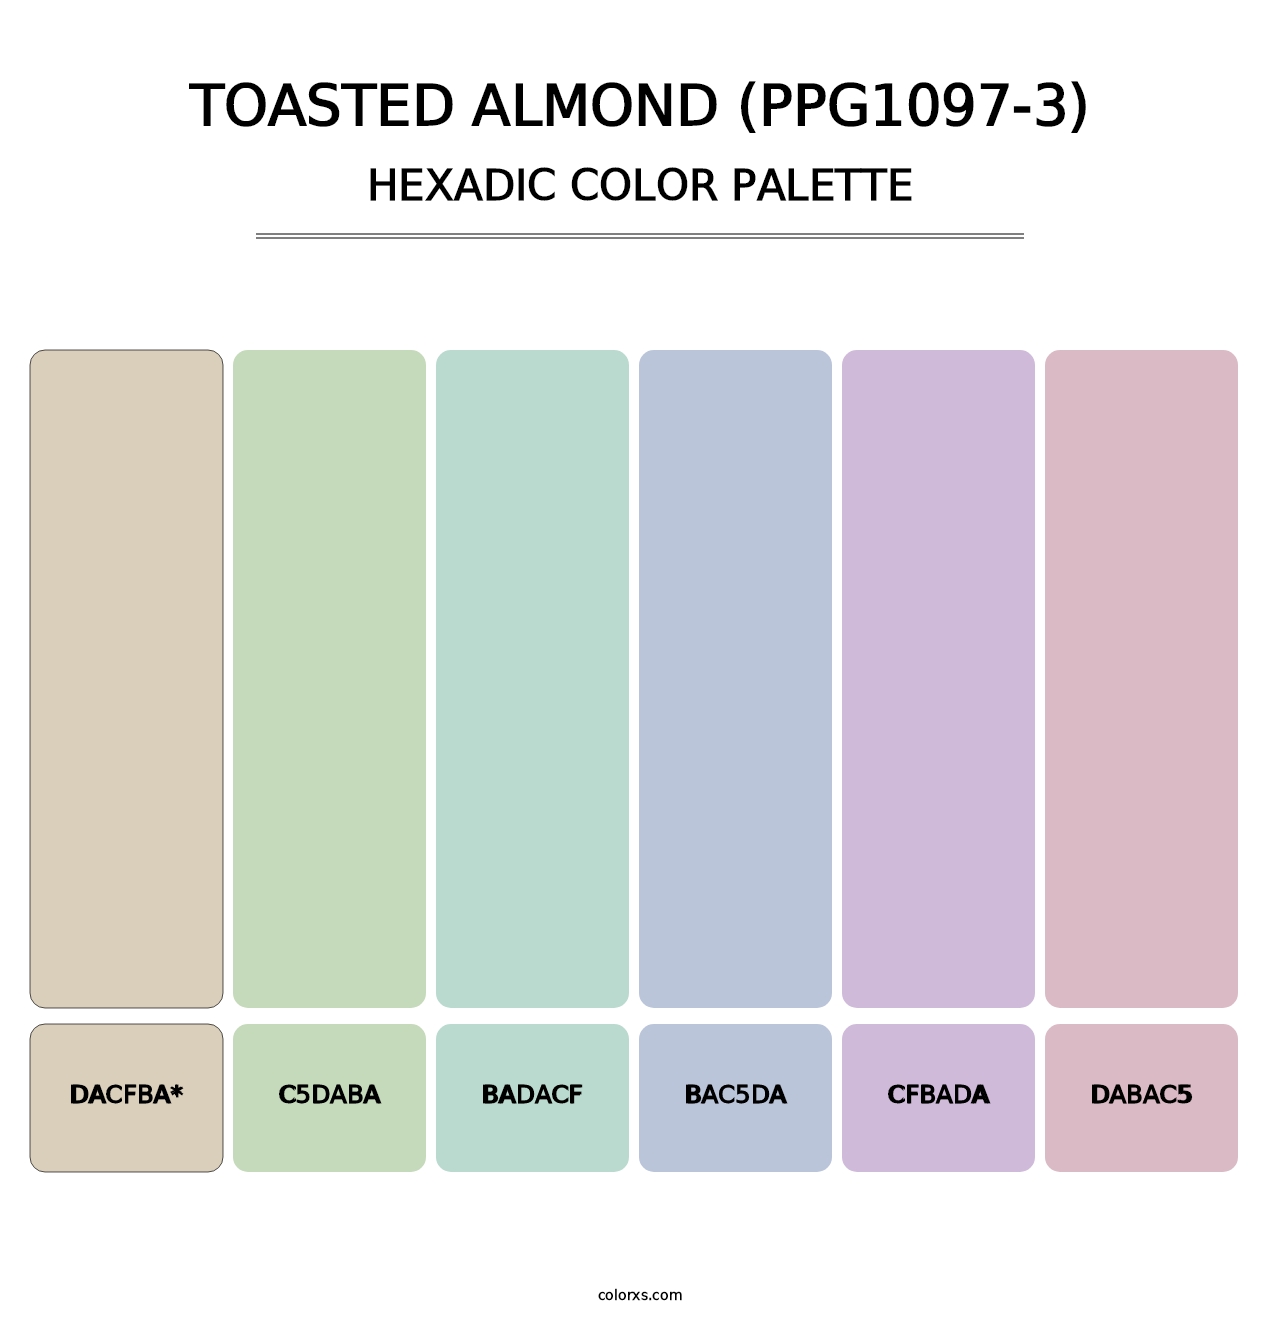 Toasted Almond (PPG1097-3) - Hexadic Color Palette